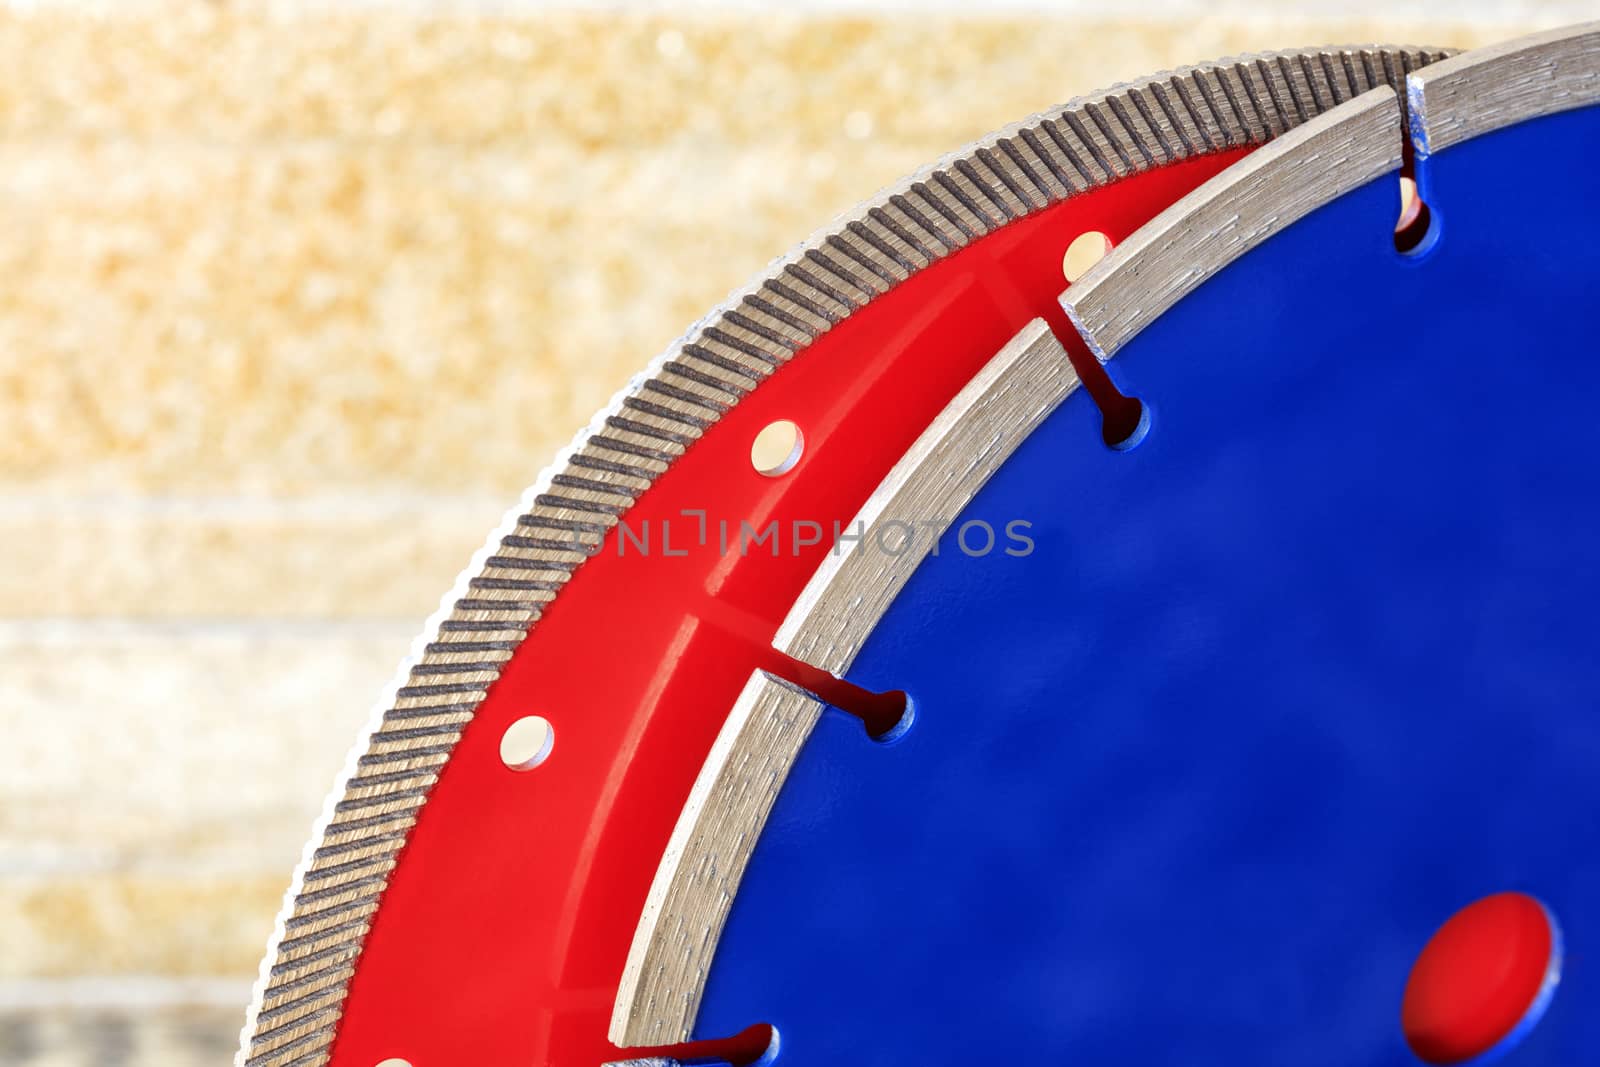 Red diamond cutting disc for granite and stone, blue for concrete, reinforced concrete against the orange-golden sandstone wall.